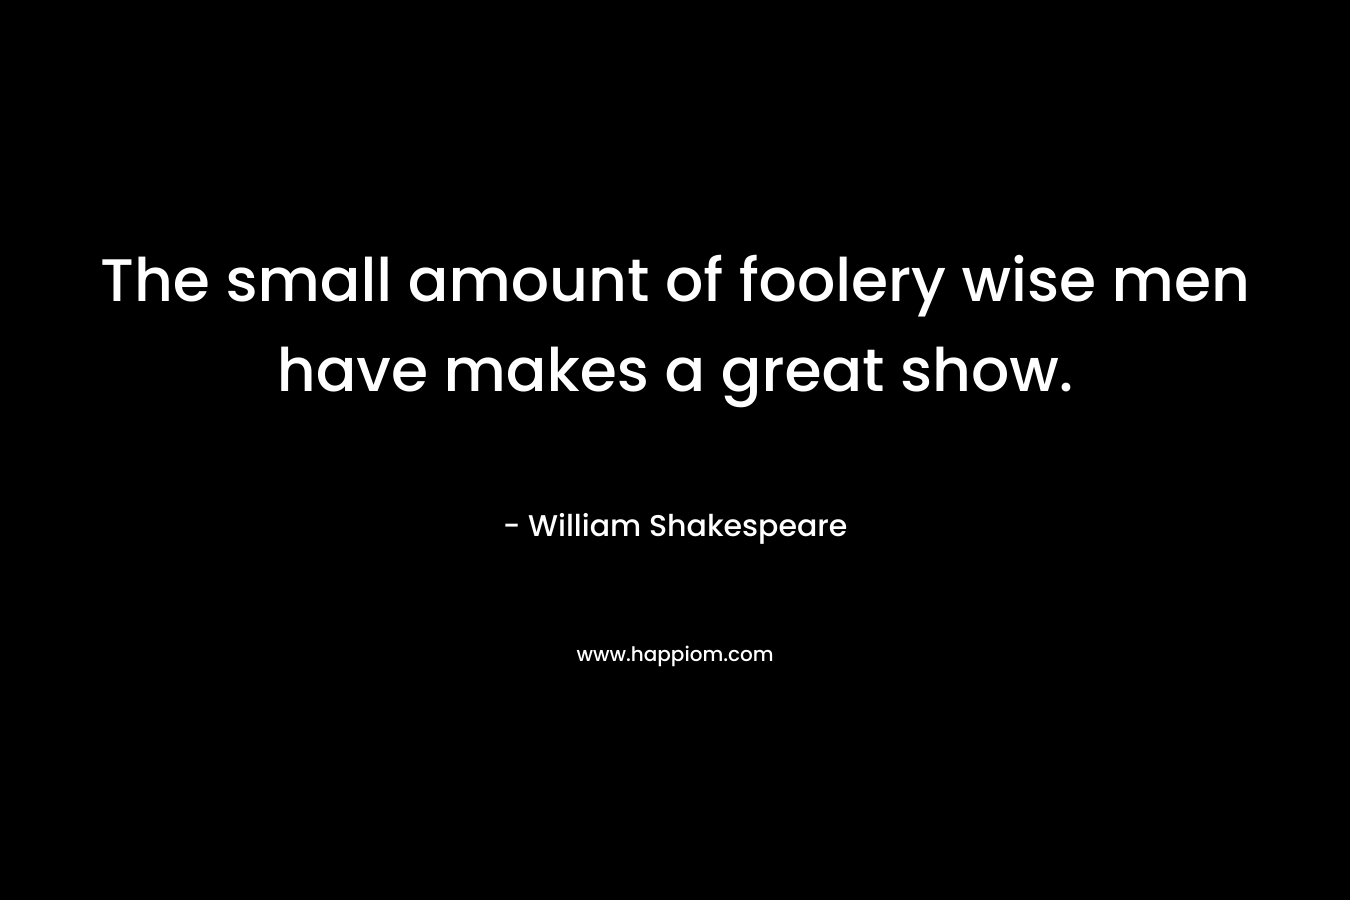 The small amount of foolery wise men have makes a great show.